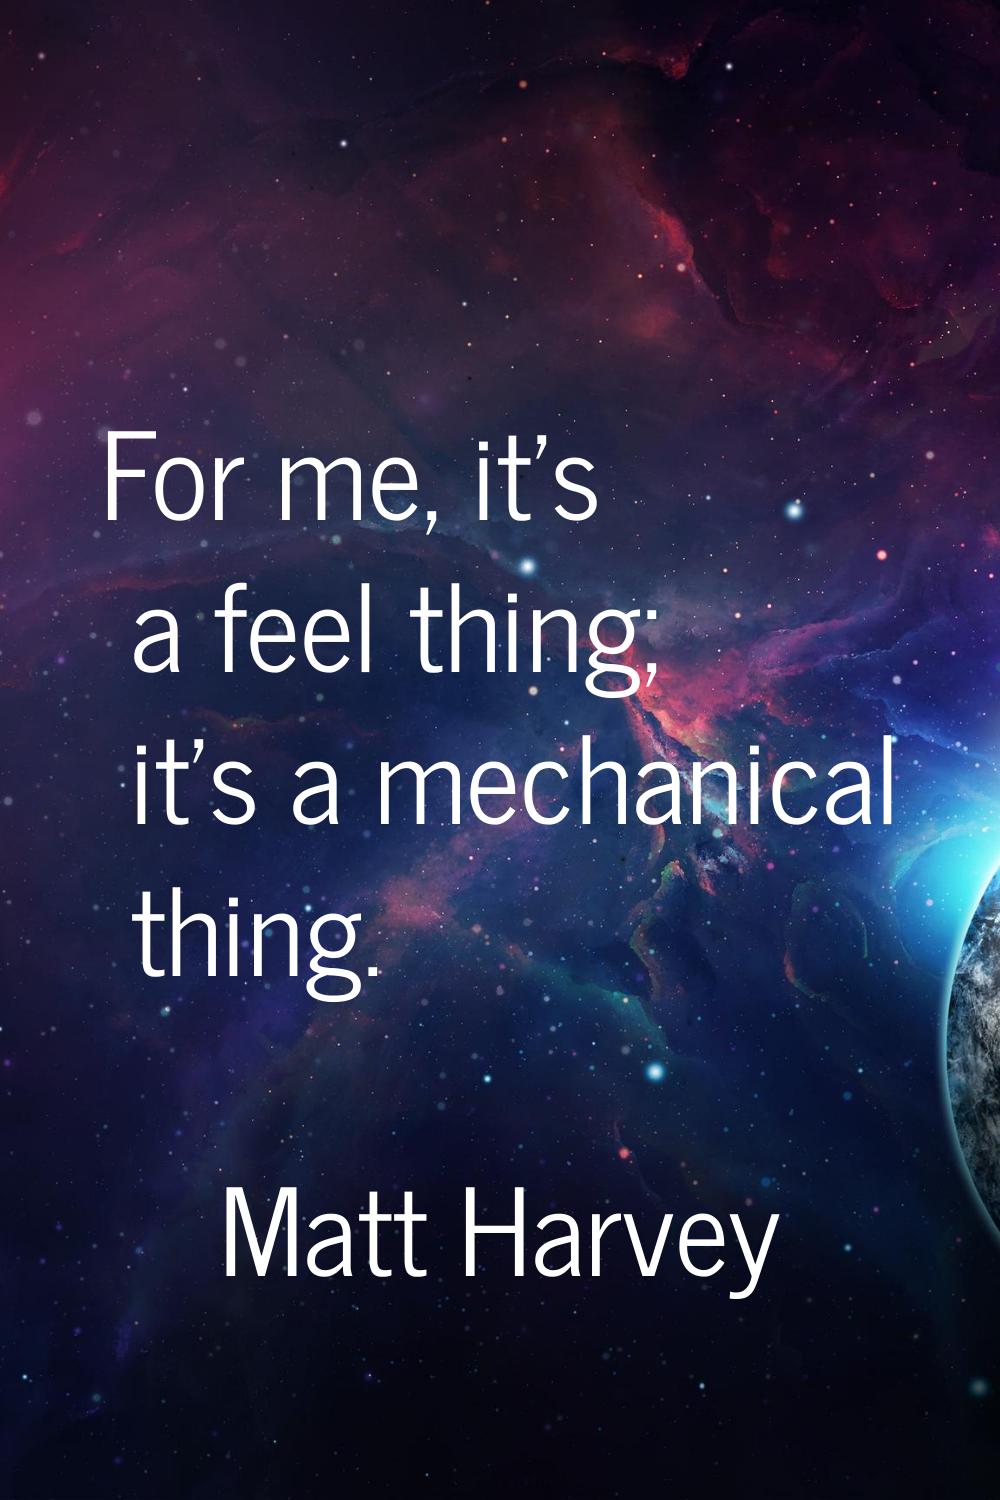 For me, it's a feel thing; it's a mechanical thing.